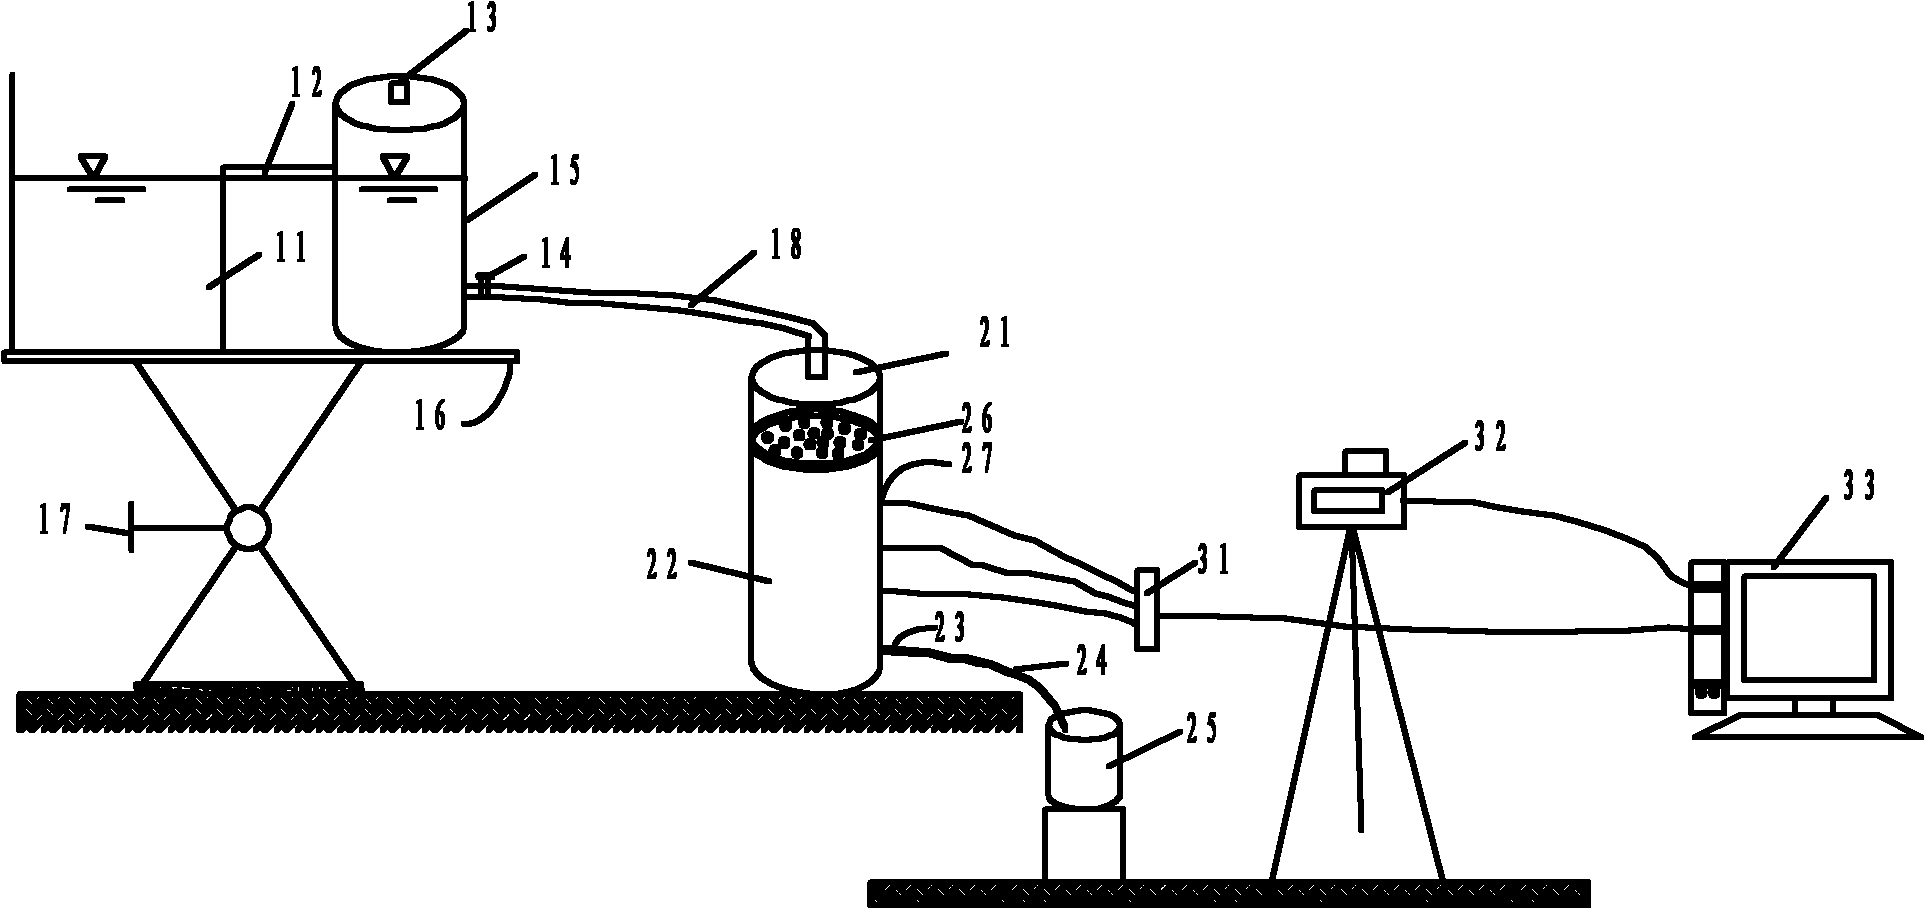 Device for measuring soil water movement and soil structure and method